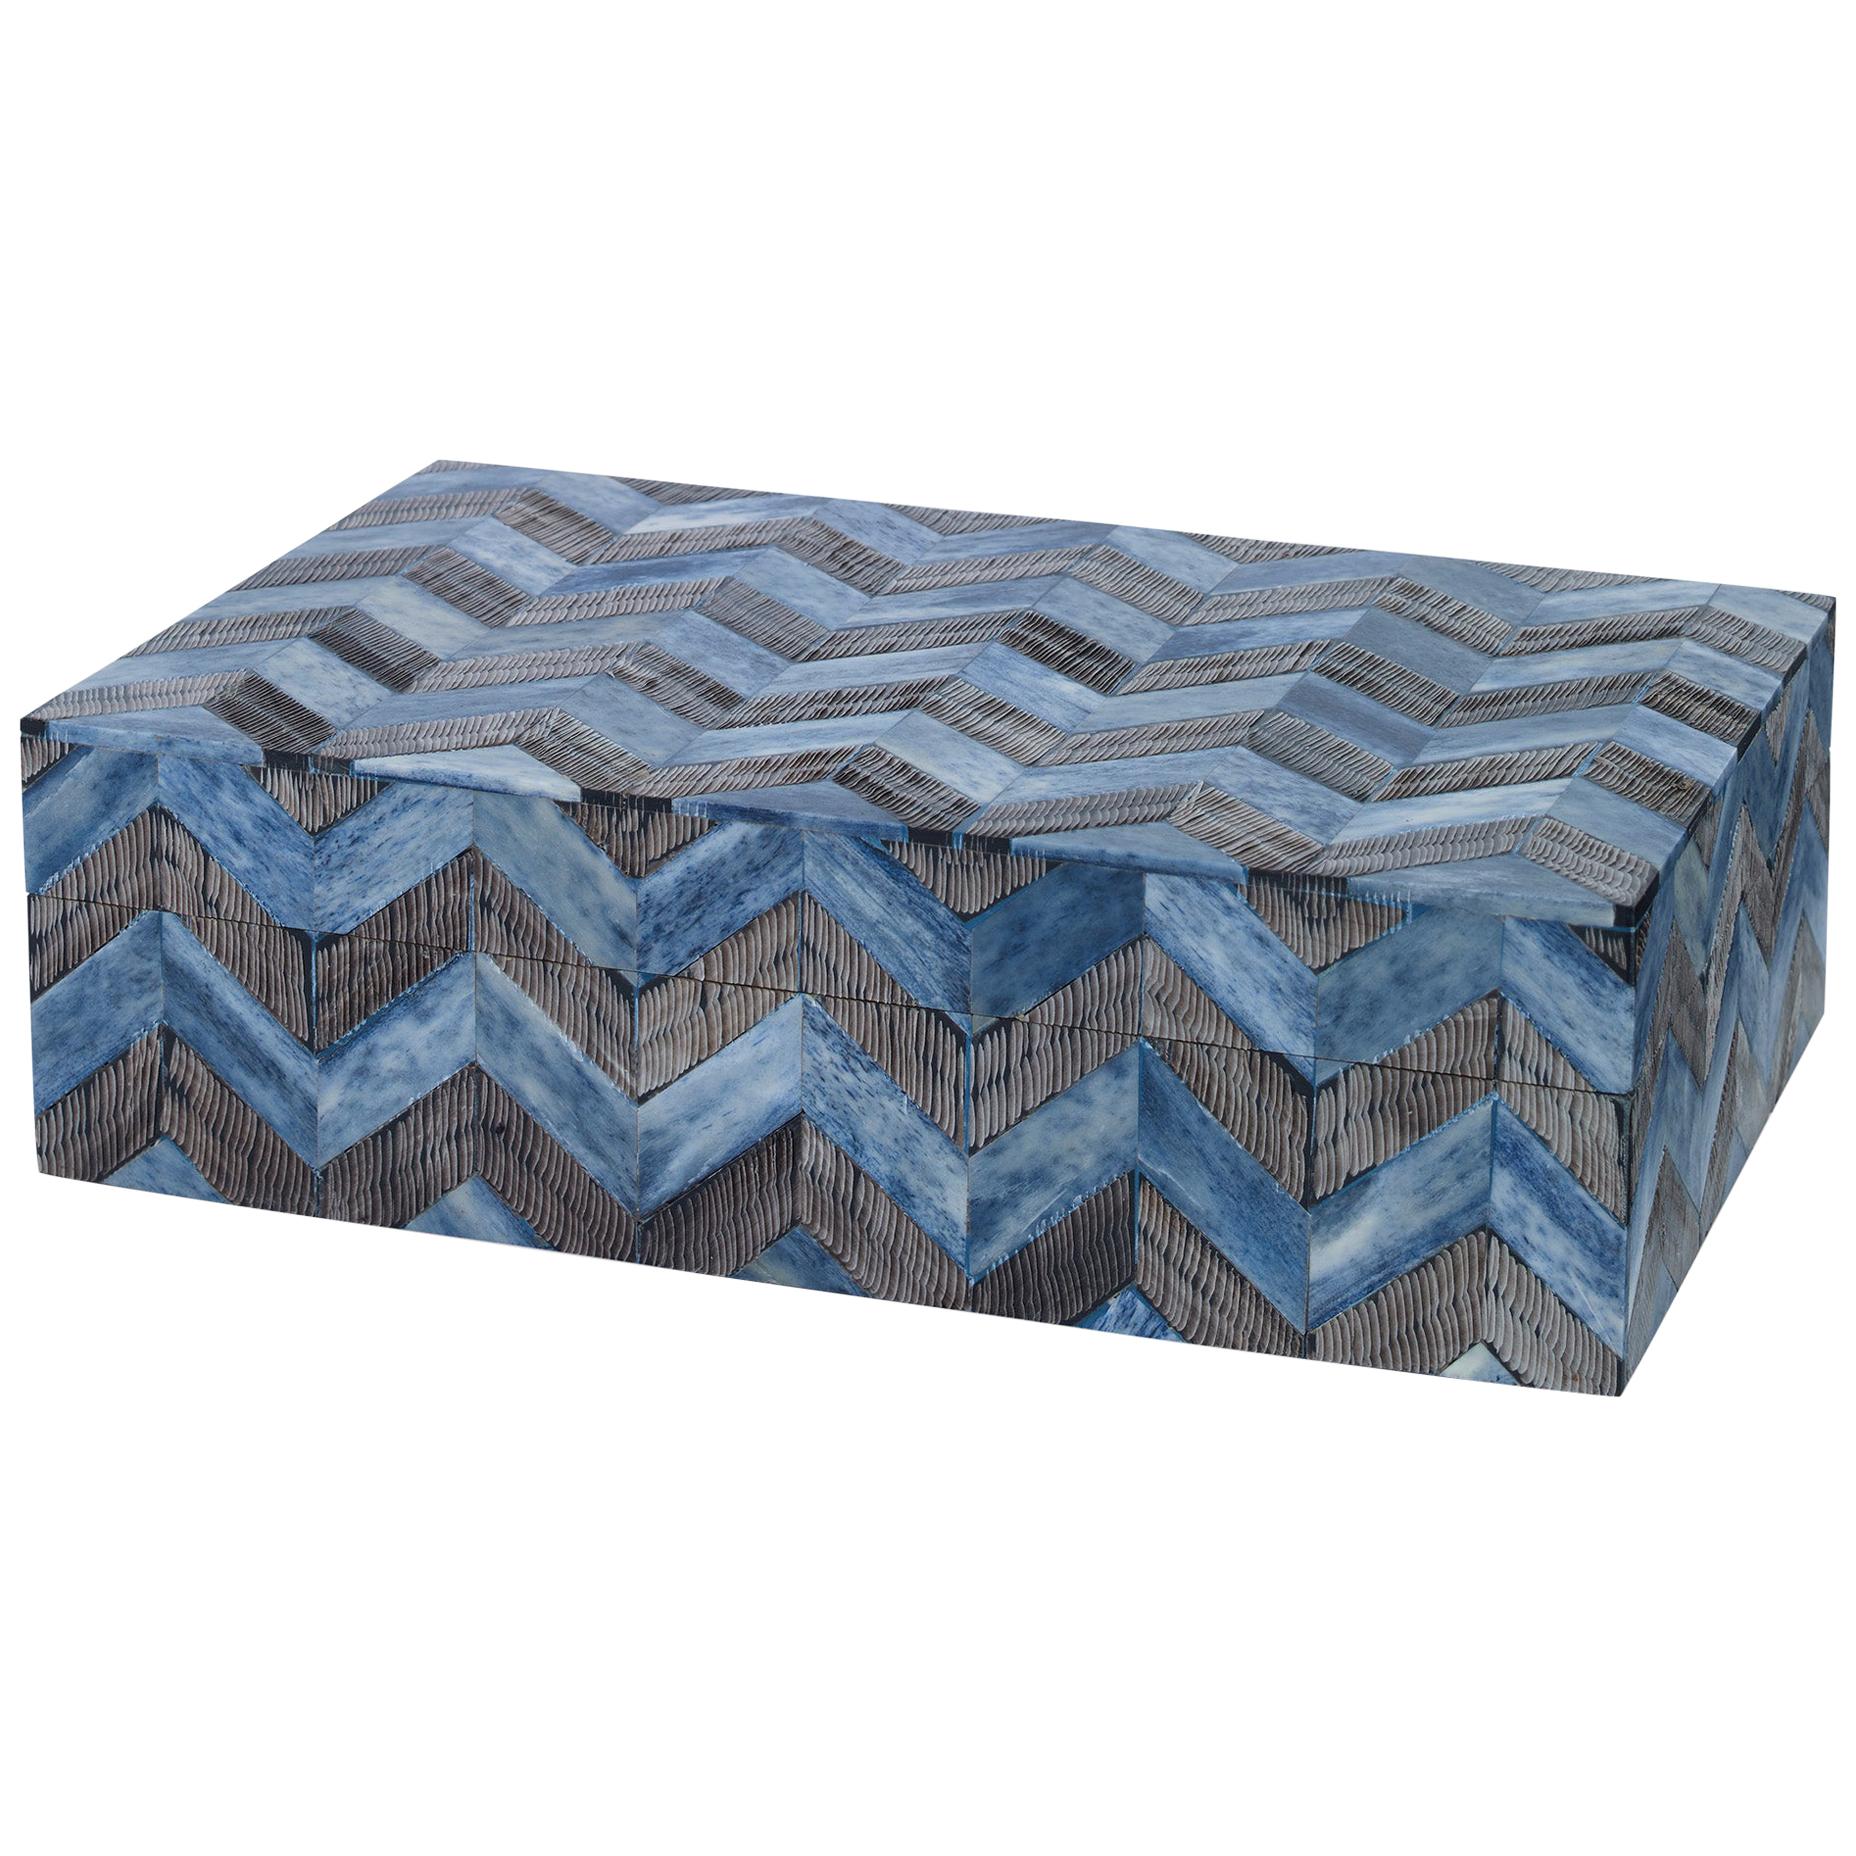 Bethel Decorative Box in Zigzag Pattern Made with Bone and Horn by CuratedKravet